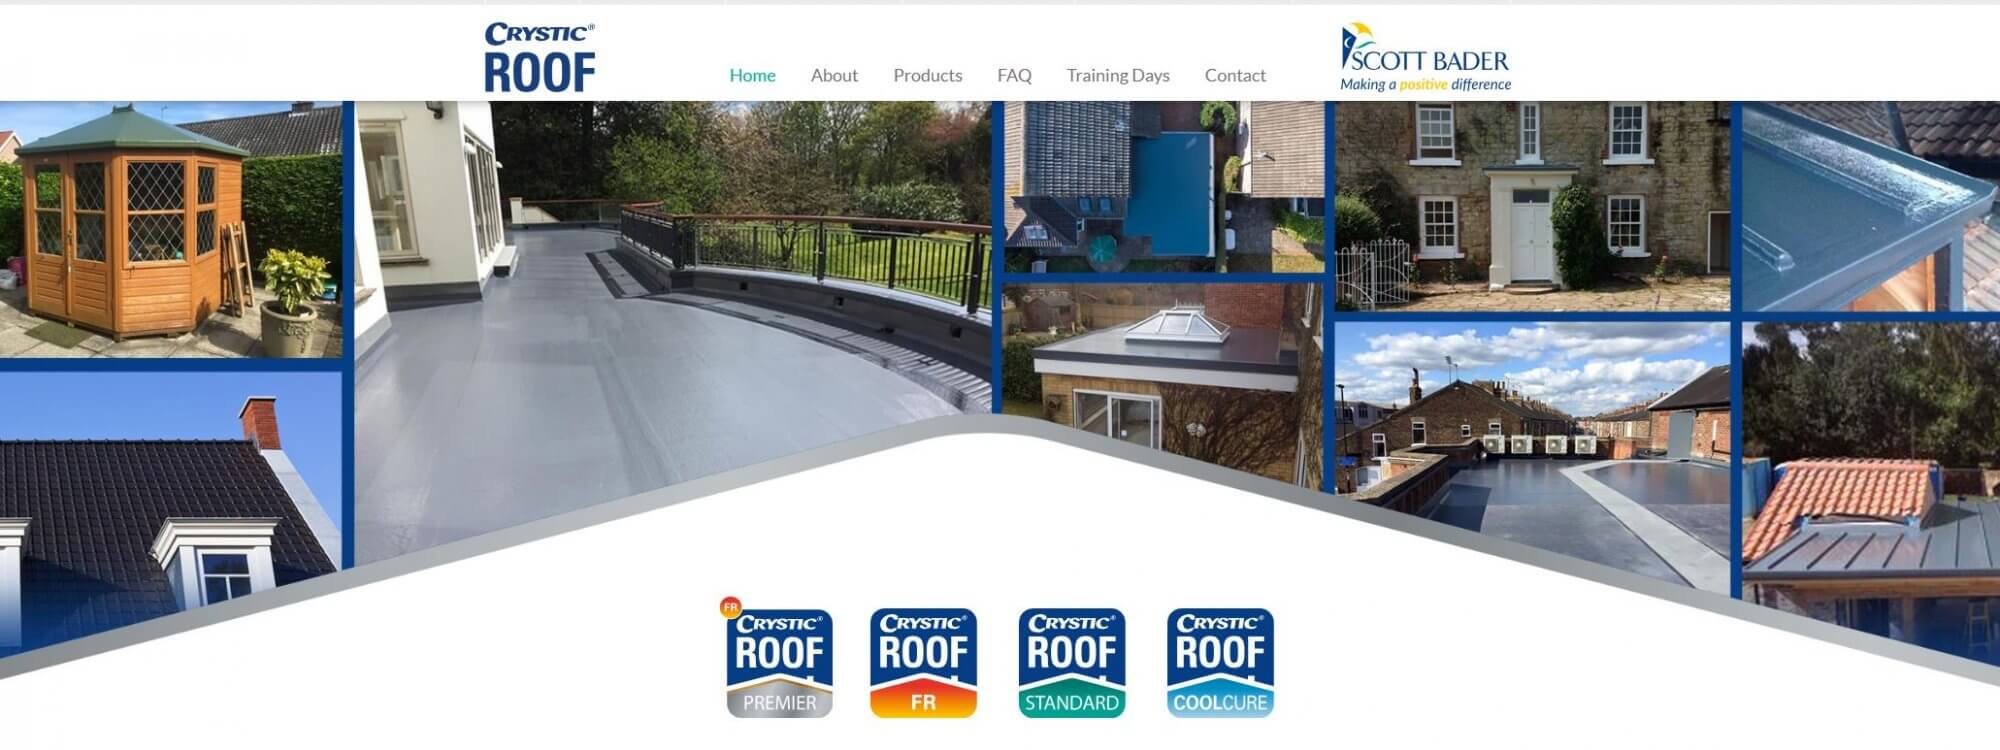 Scott Bader to exhibit it’s CrysticROOF range at The RCI Show